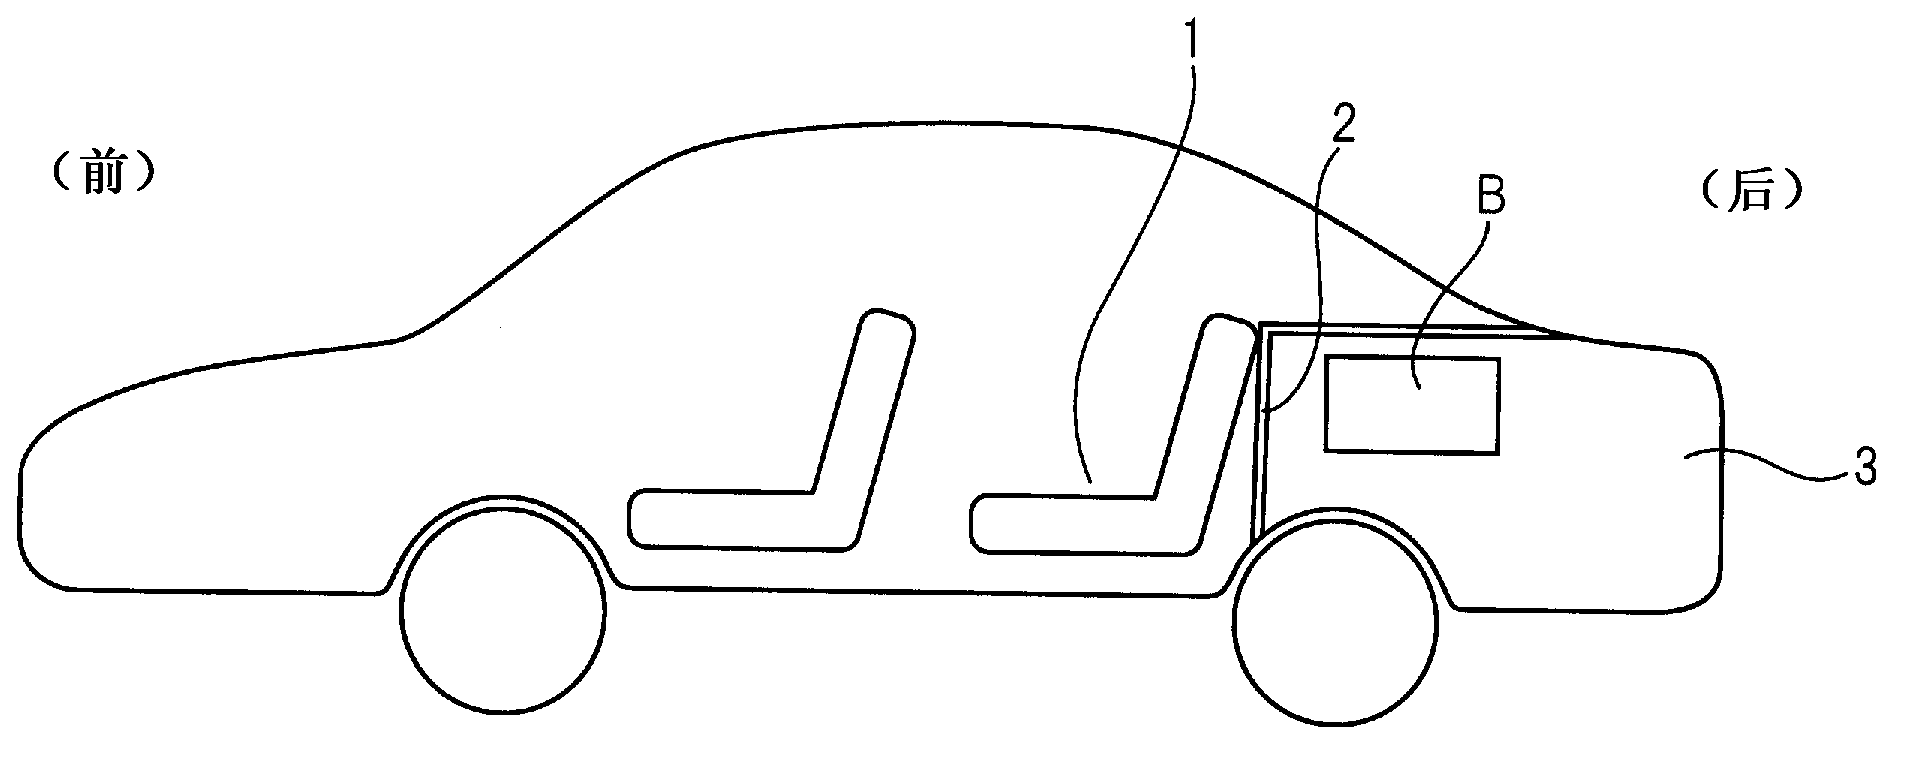 Wire-harness system in hybrid automobile